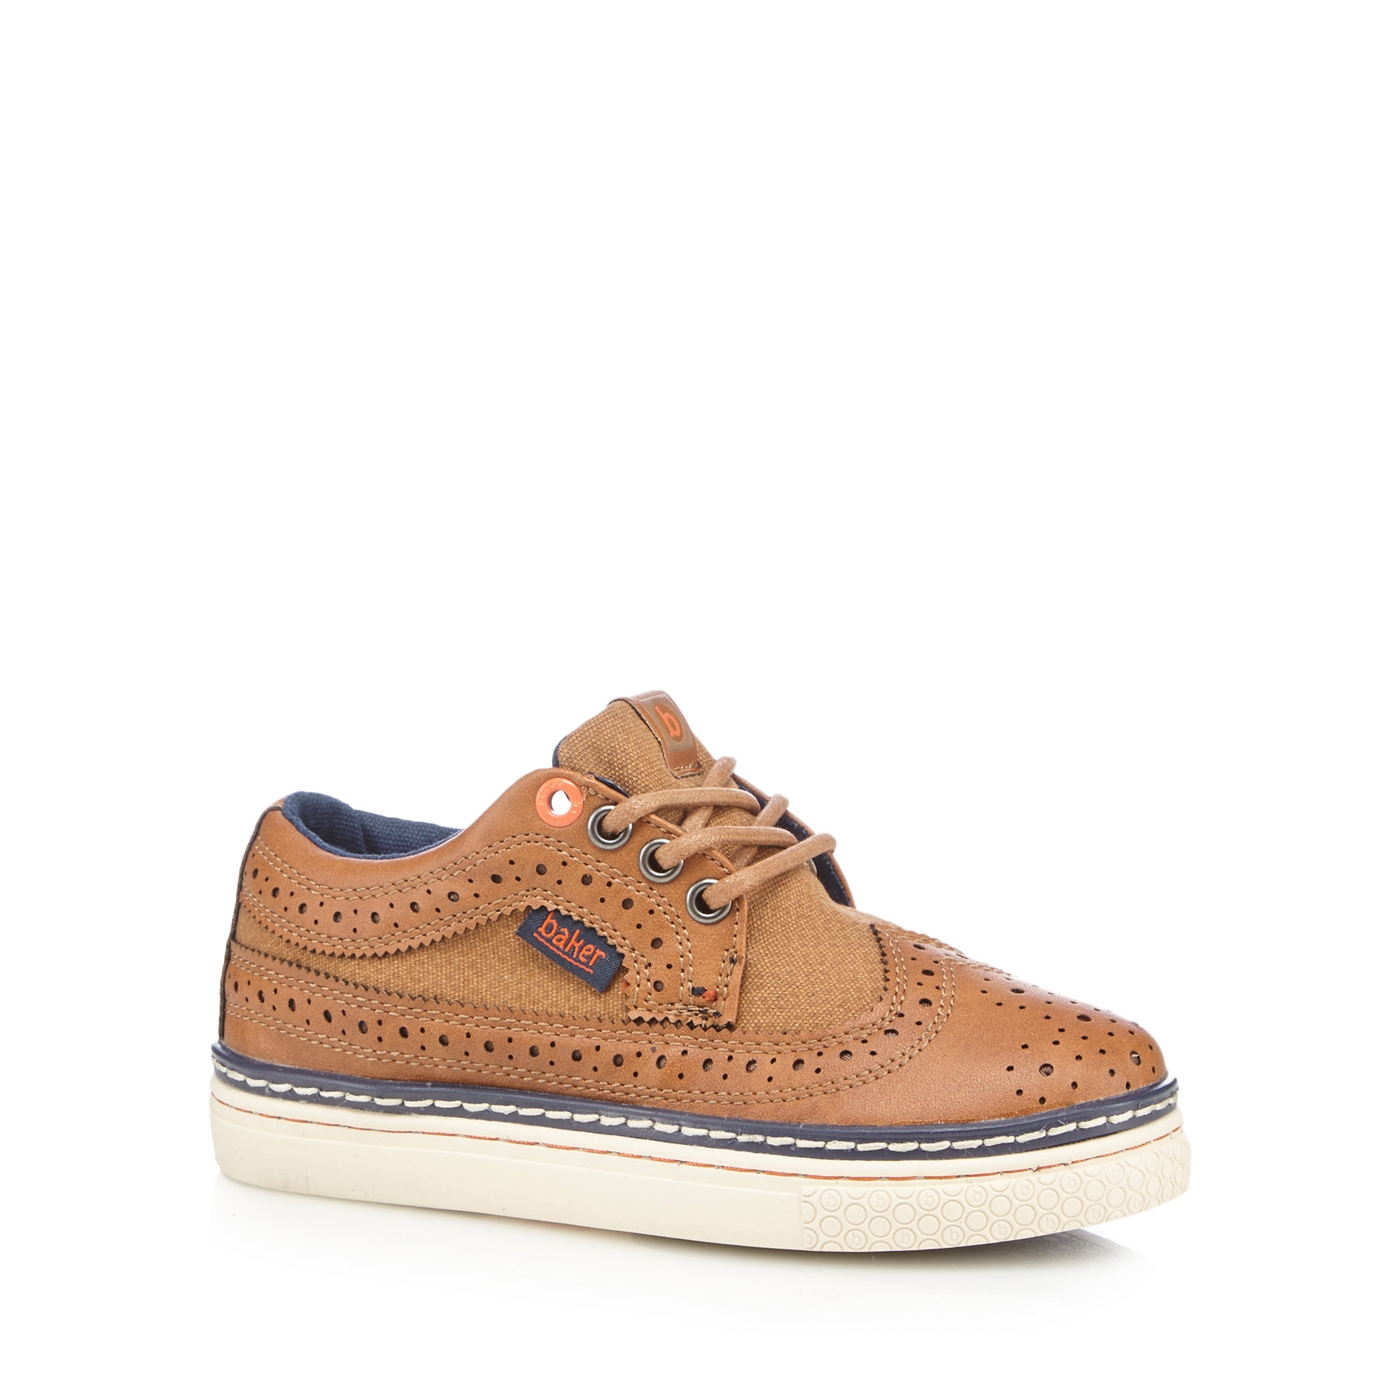 Baker by Ted Baker Boys tan brogue shoes